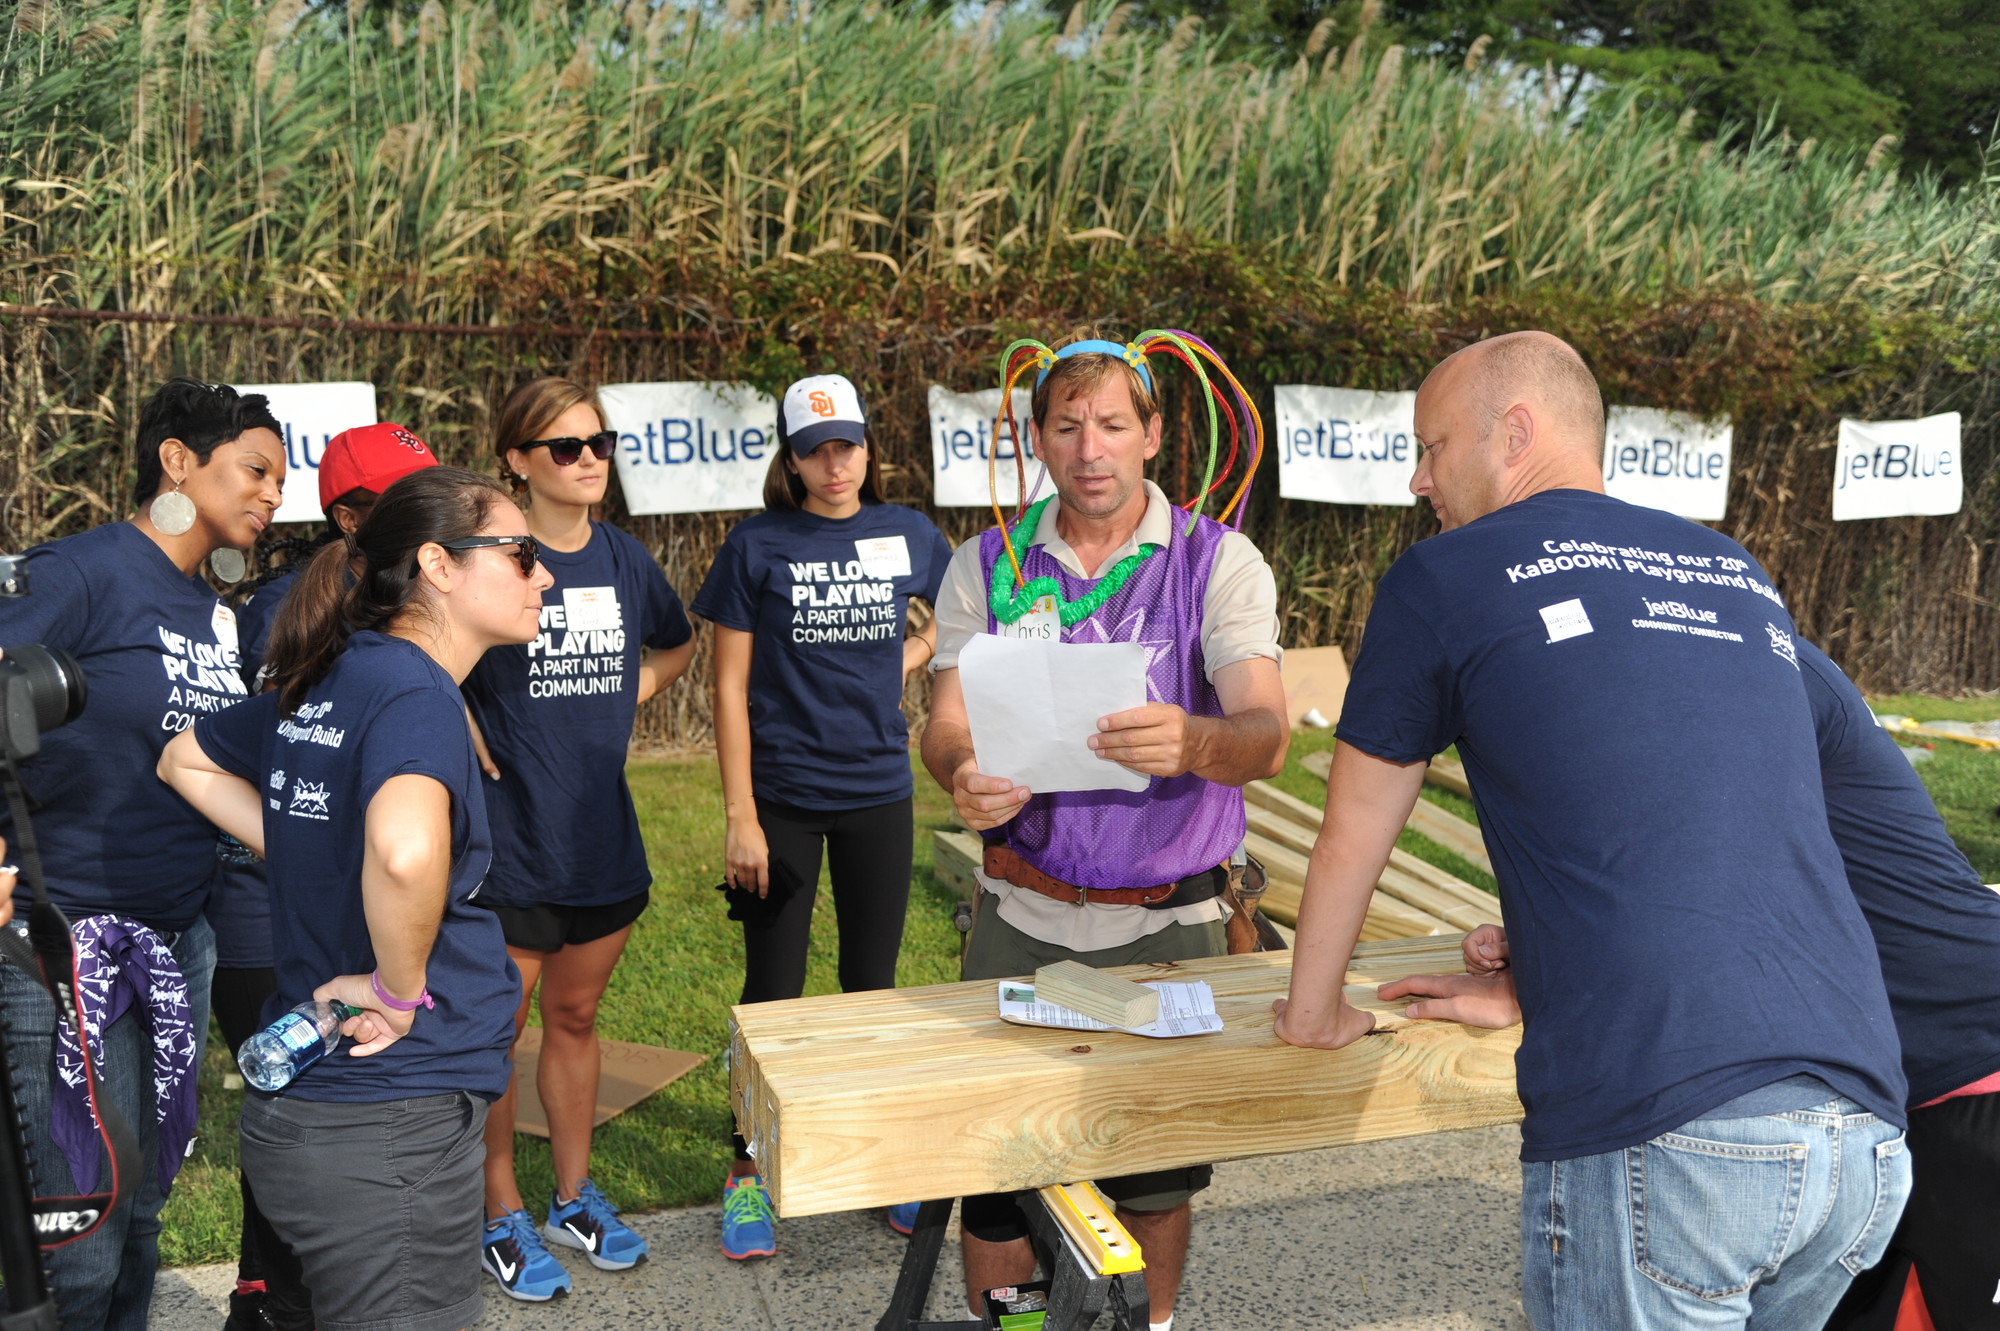 Chris Horvath of Island Park instructed a team of volunteers.